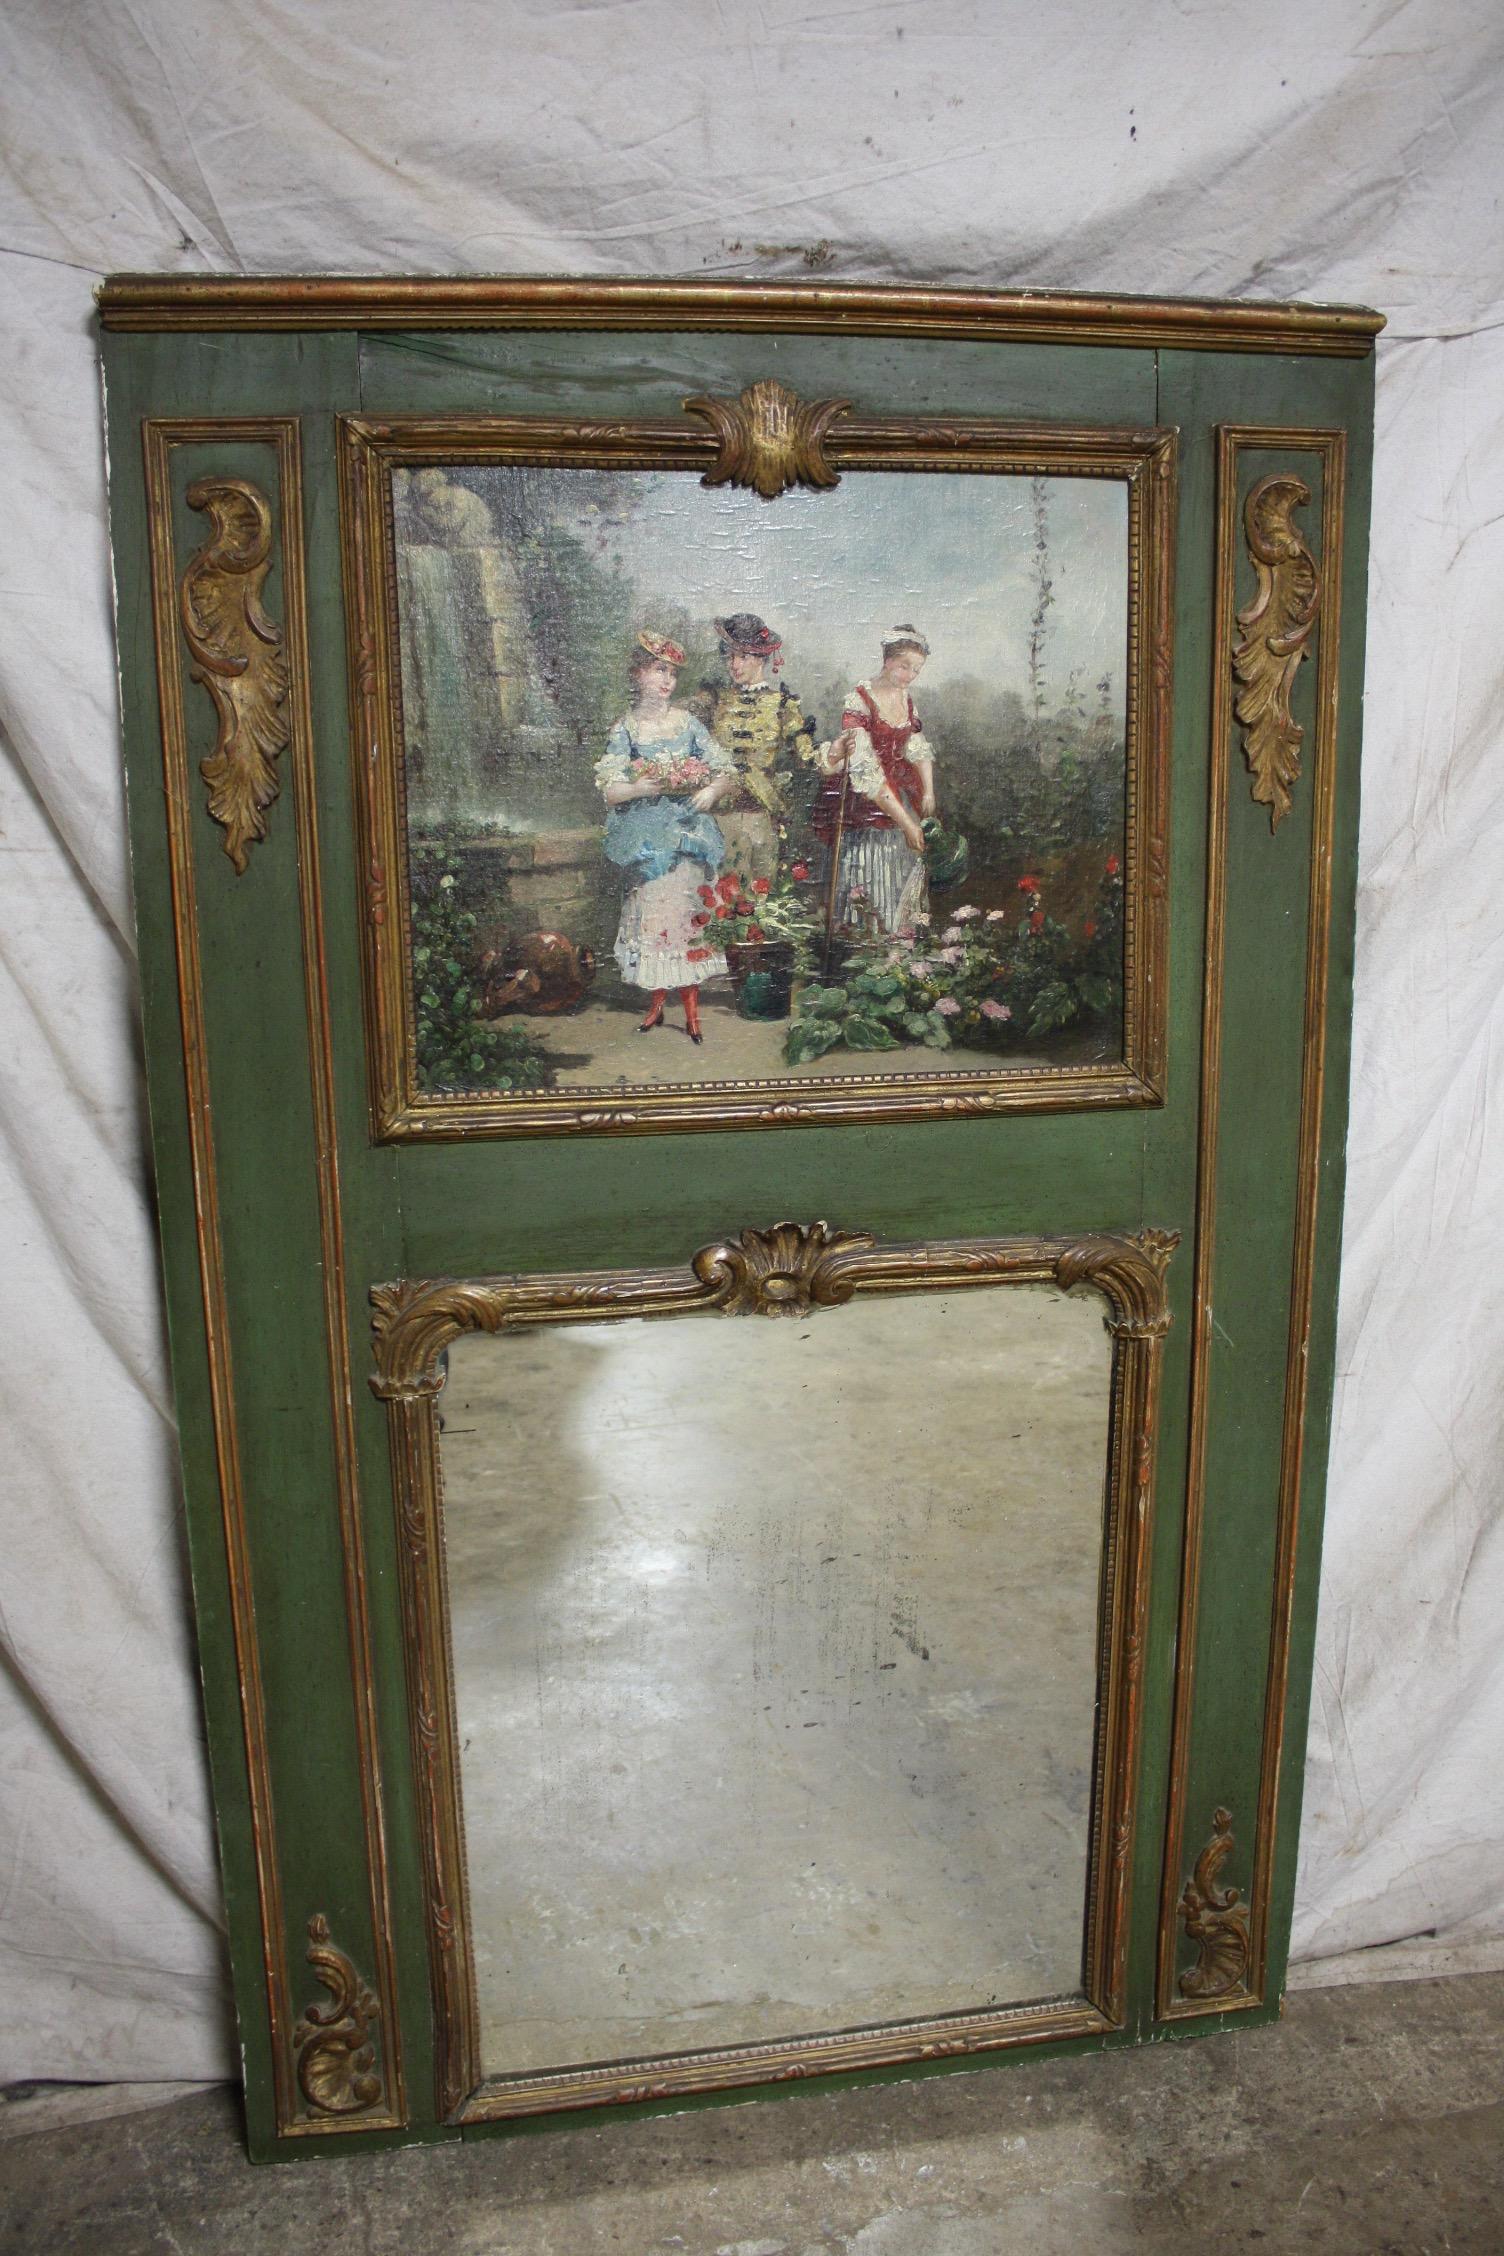 This is a Period of the King Louis XV, very colorful and a deep green paint on the frame, those kind of trumeau are originally situate above a marble mantel.